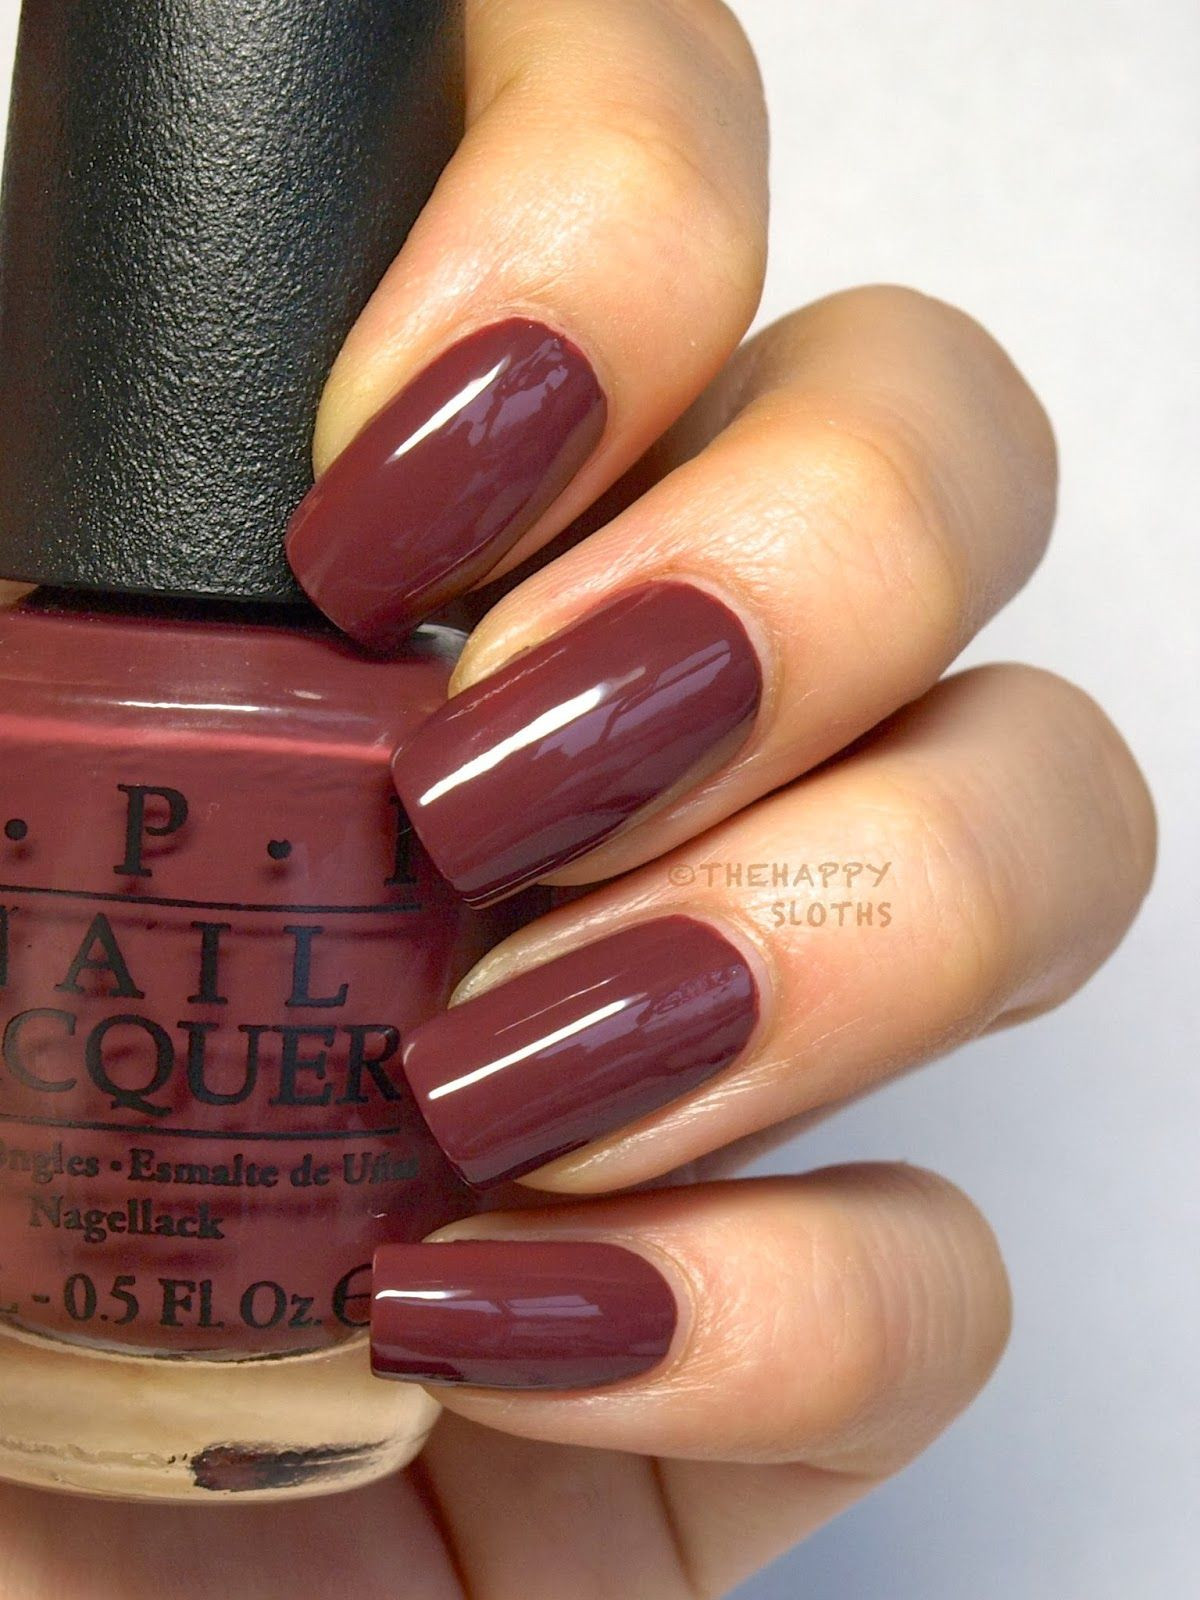 New Fall Nail Colors
 The Happy Sloths OPI Brazil Collection S S 2014 Nail